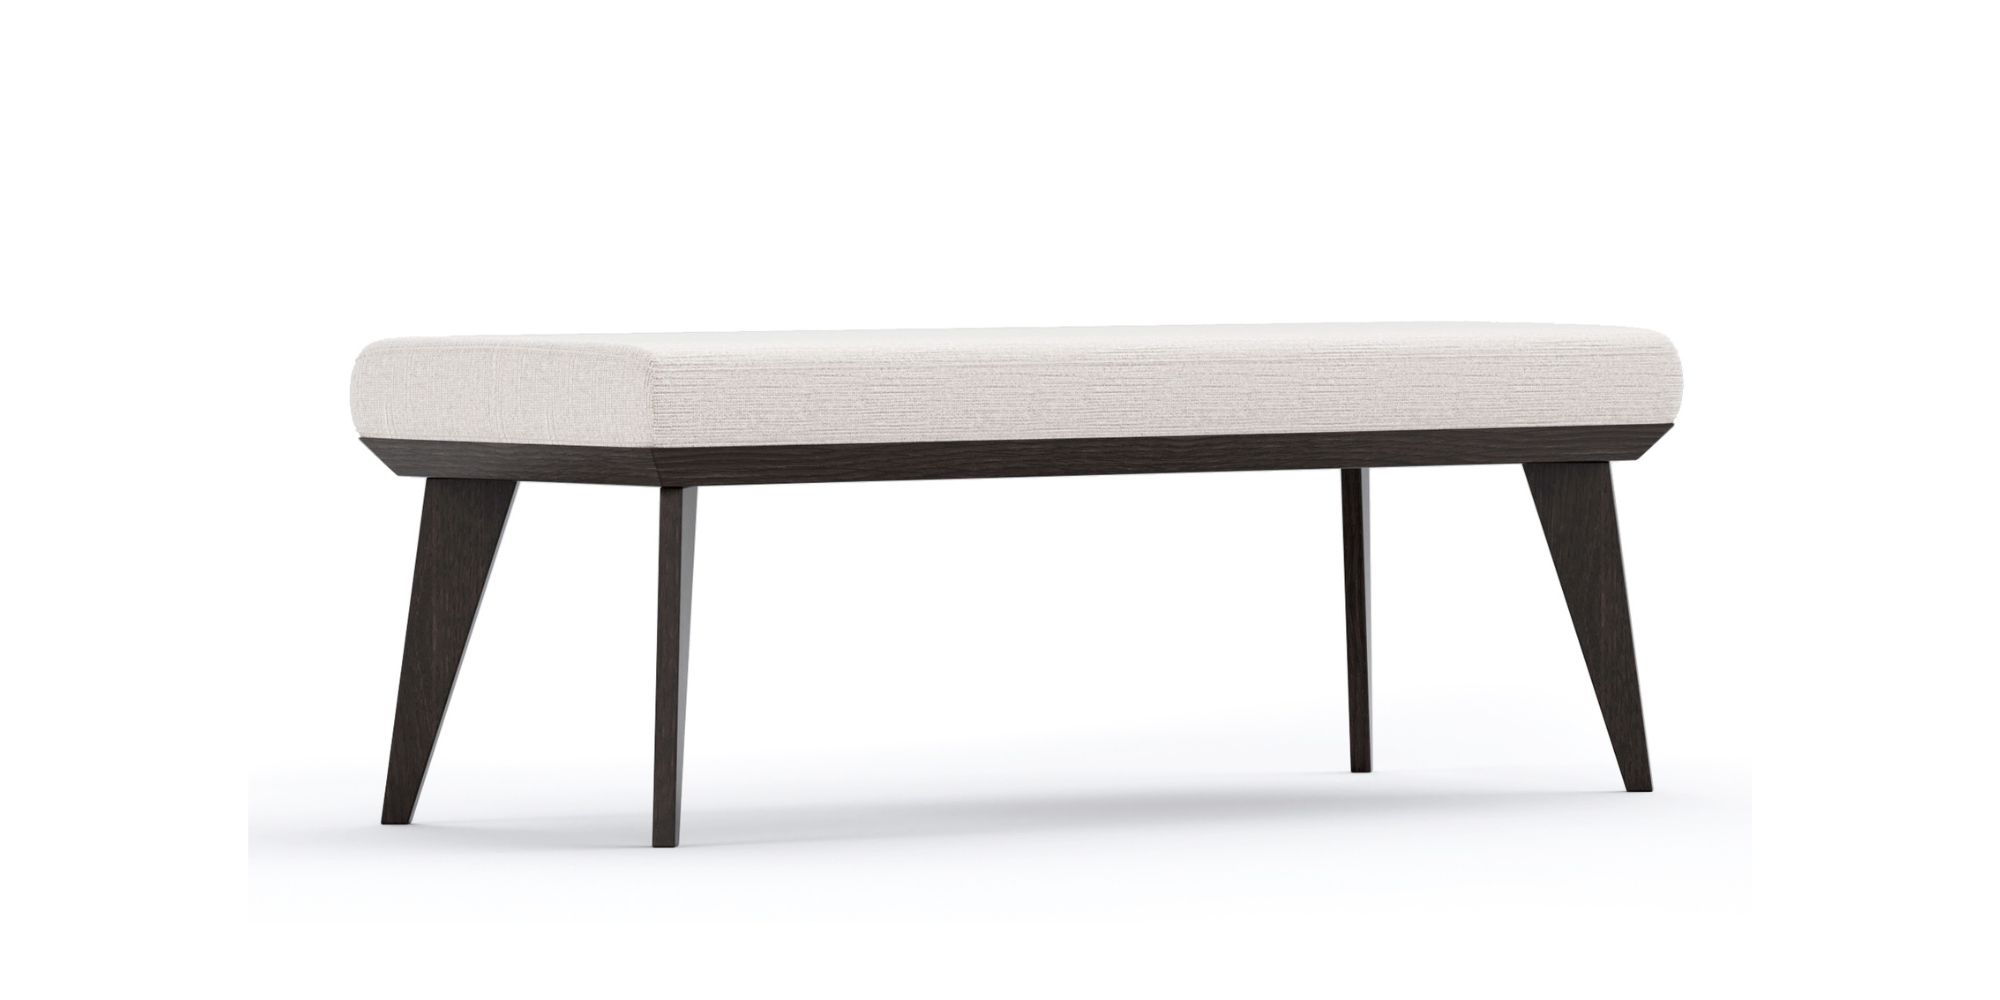 Folie Footstool in Outdoor Storage, Stools & Benches for Folie collection